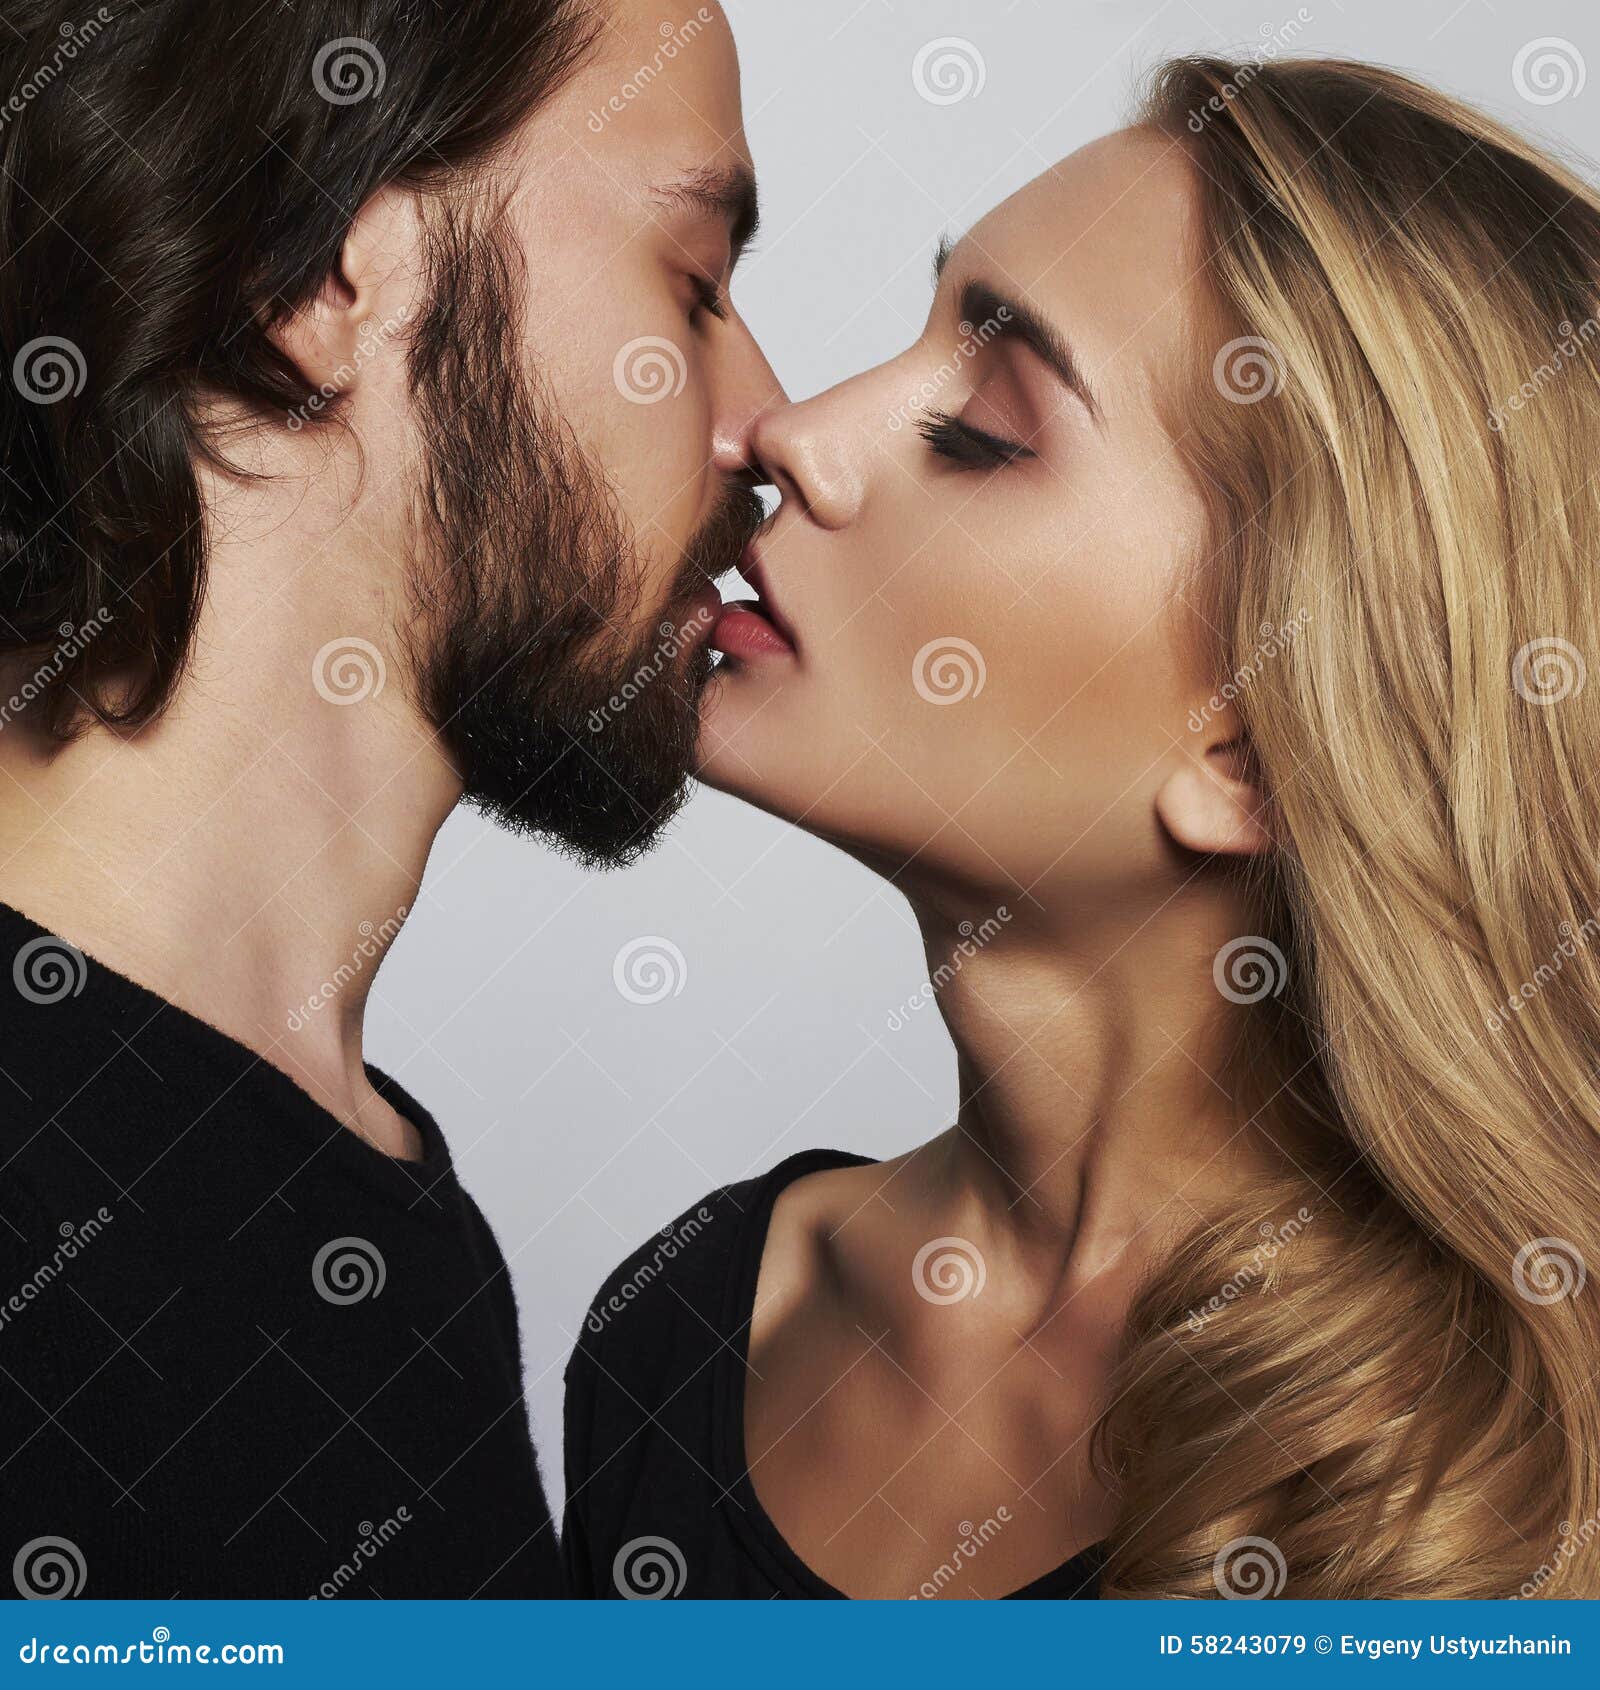 Kissing Couple Portrait.romantic Beautiful Woman and Handsome Man Stock Image picture